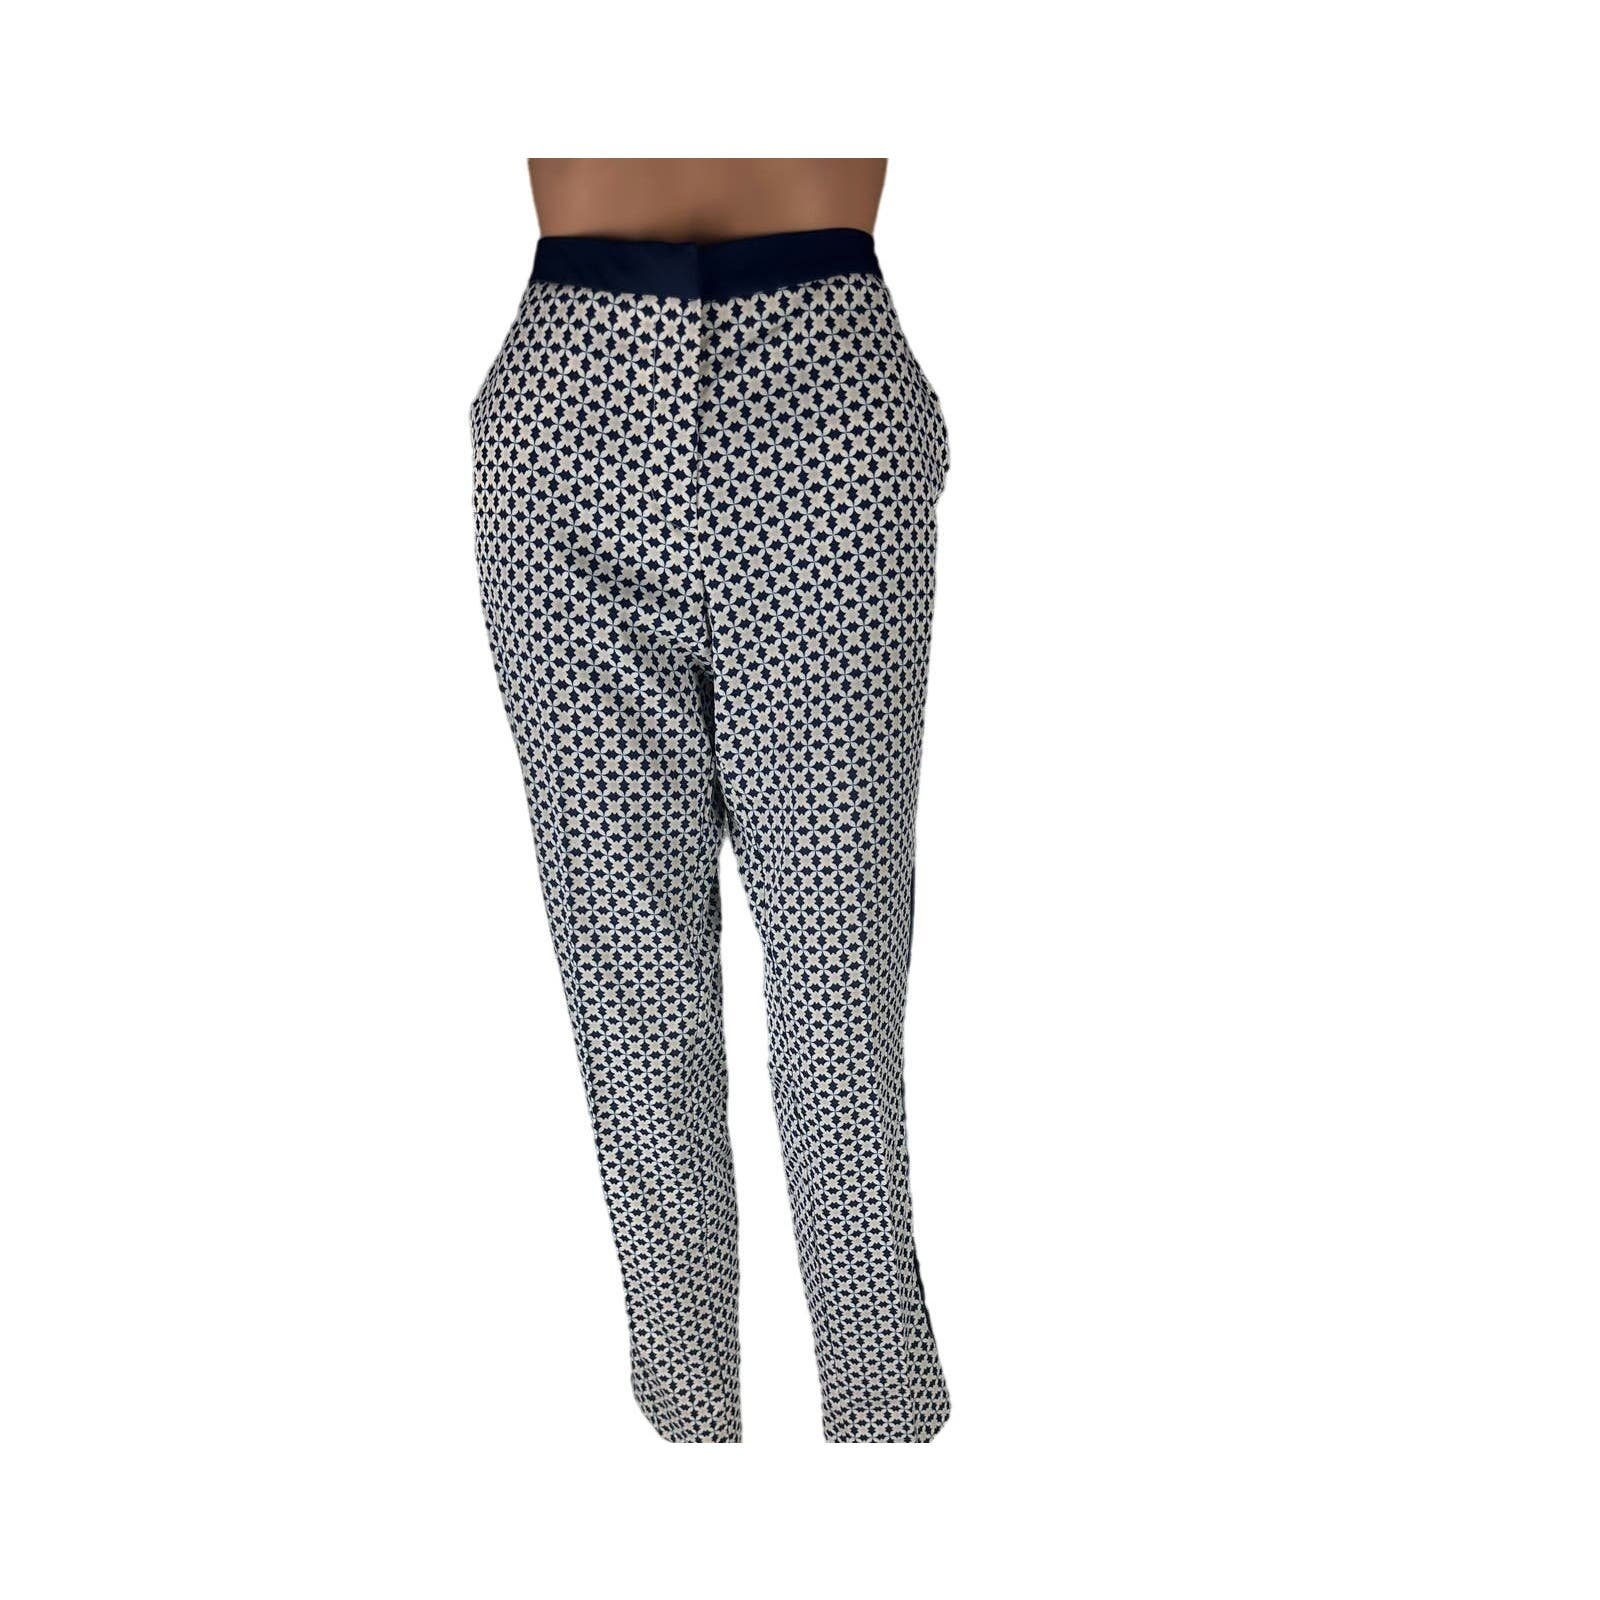 H&M 8 Geometric Print Pants Trousers Navy Waist and Side Stripes New Without Tag ifPwEdK5t